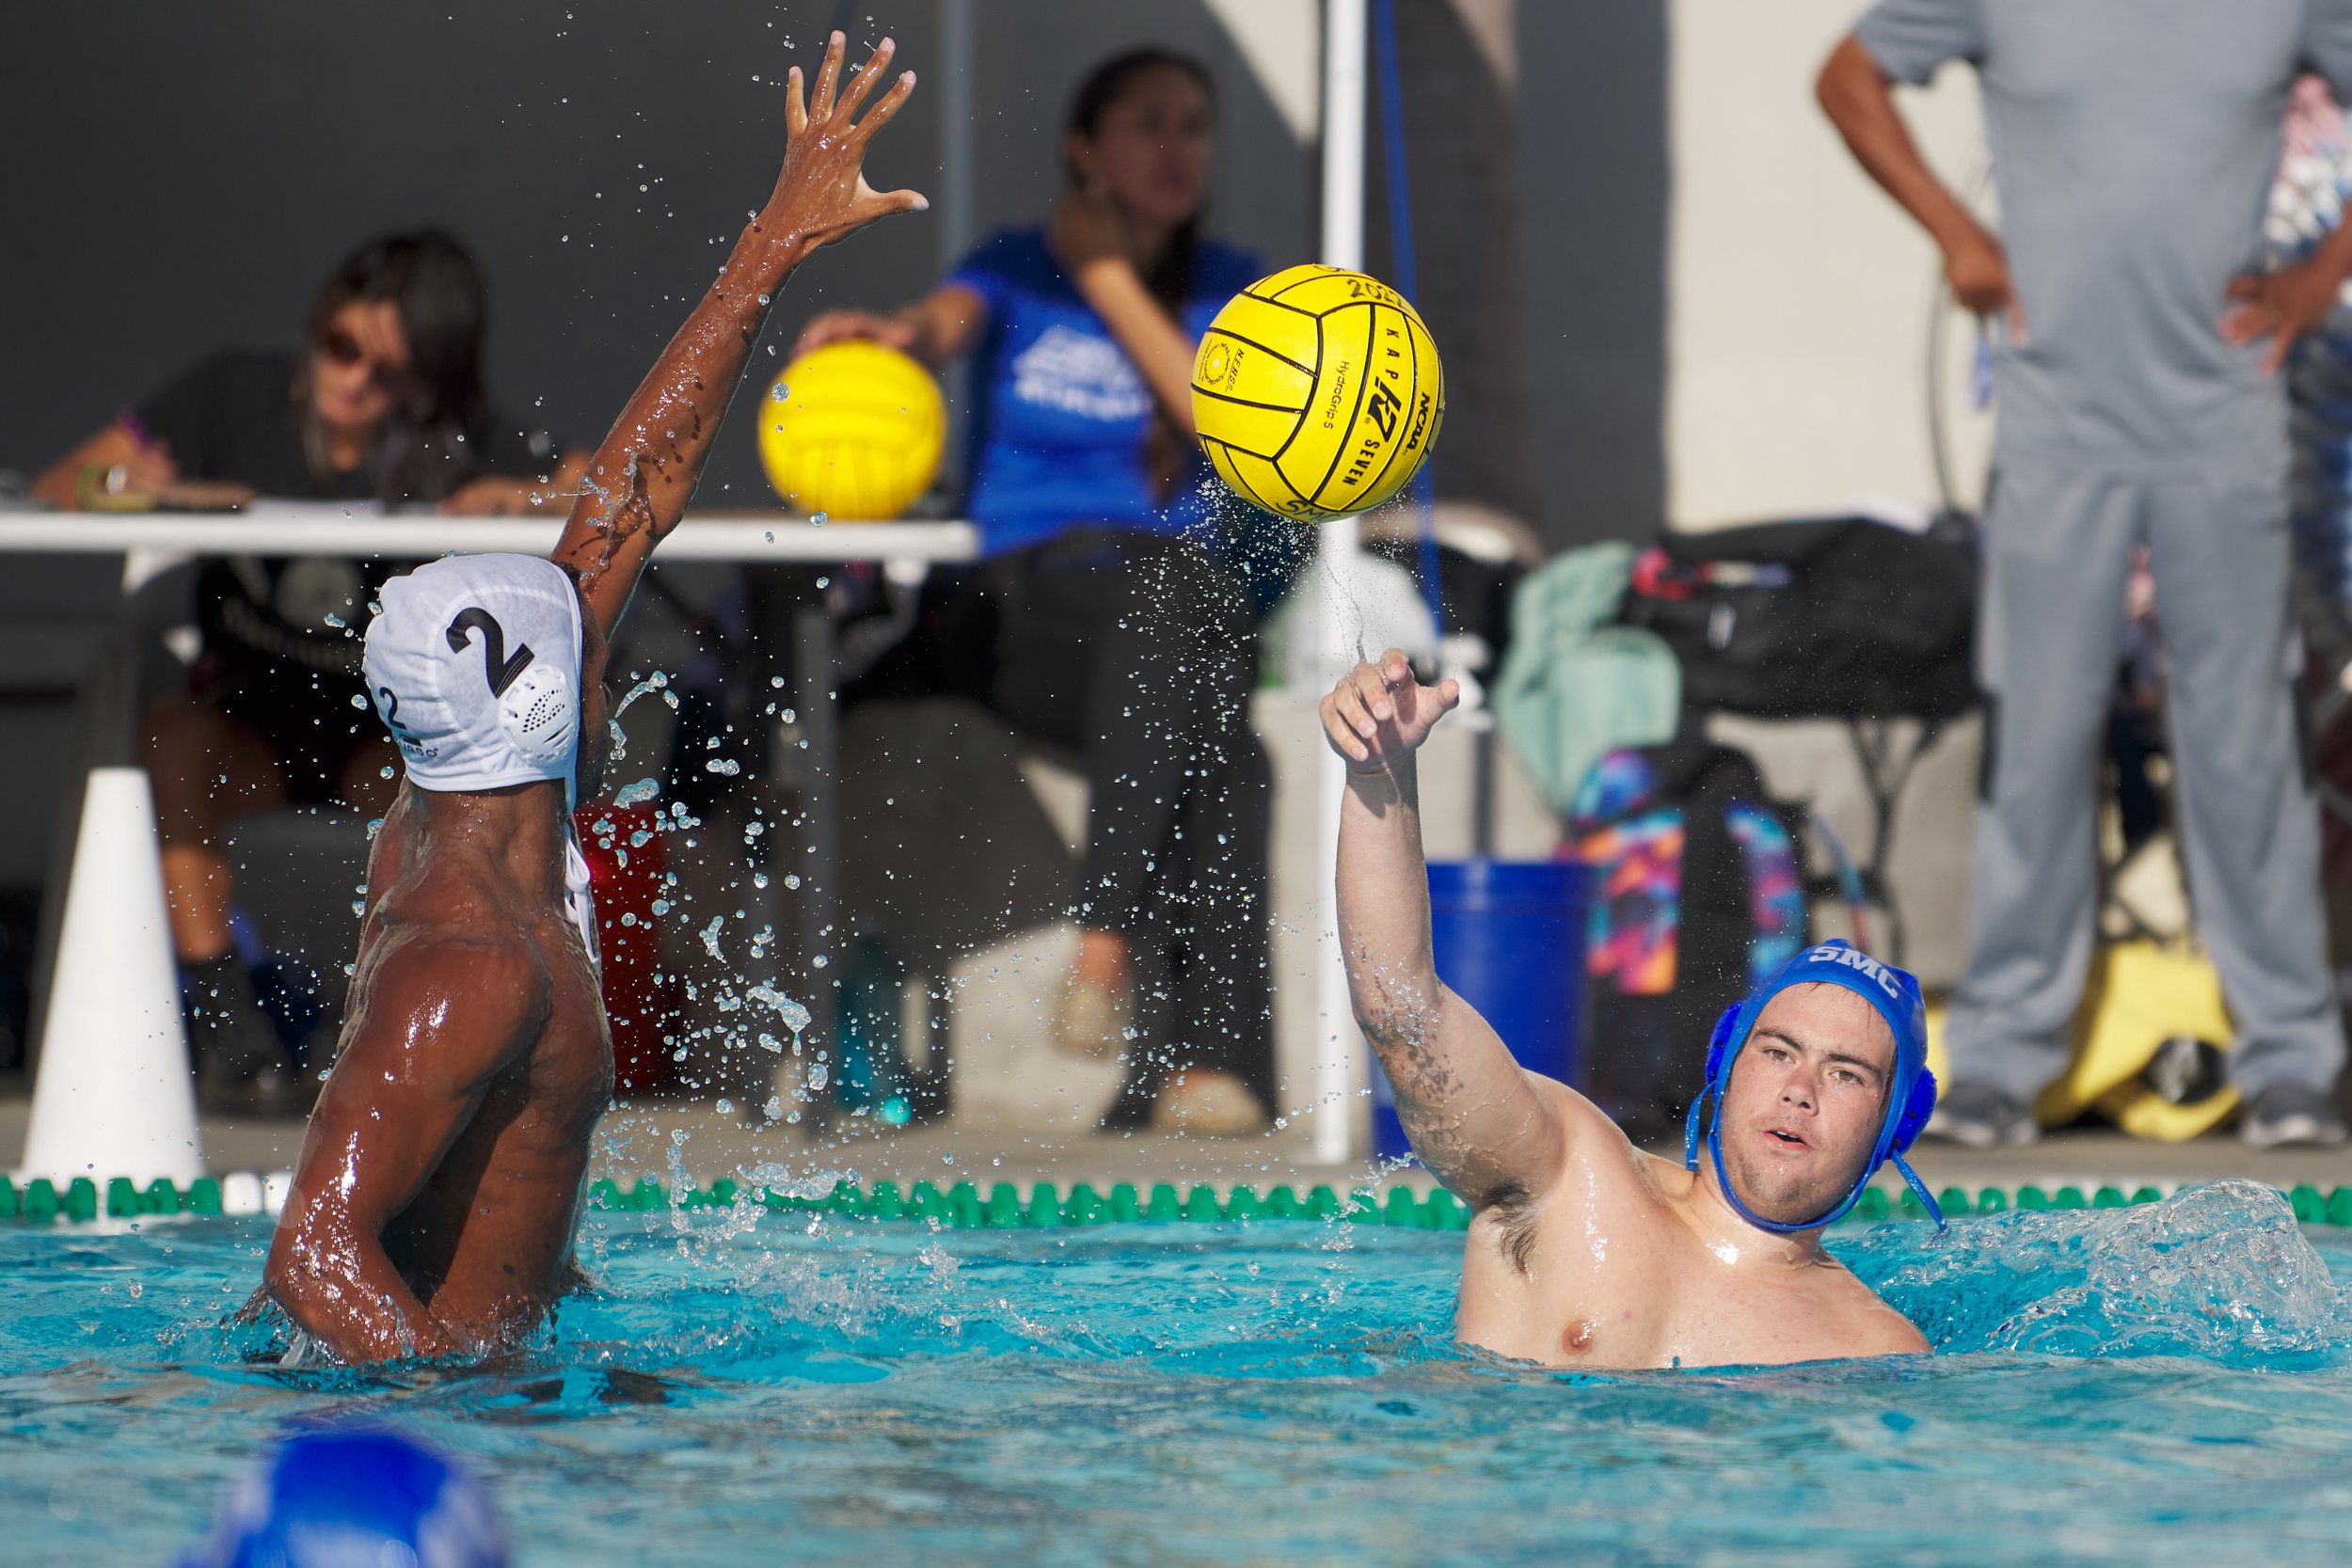  Santa Monica College Corsairs' Preston Halbert (right) and Los Angeles Valley College Monarchs' Santiago Bernal (left) during the men's water polo match on Wednesday, Sept. 28, 2022, at the SMC Aquatics Center in Santa Monica, Calif. The Corsairs lo